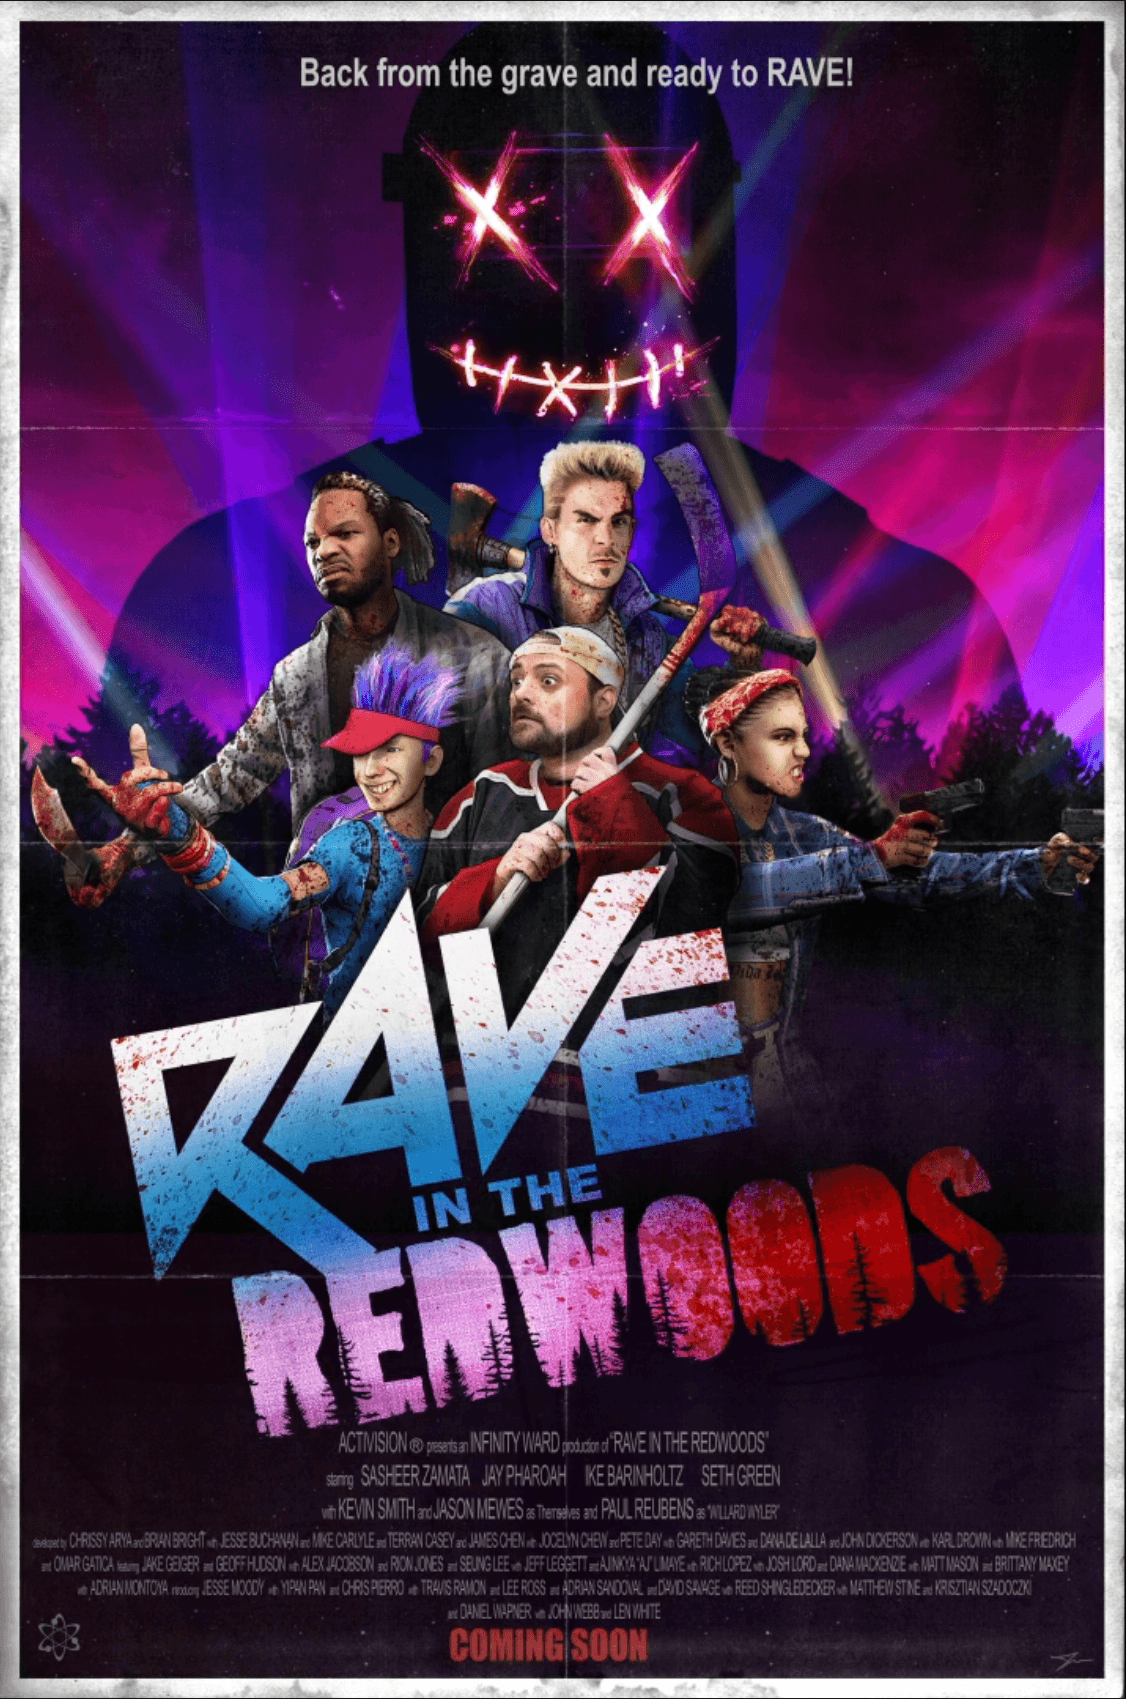 Official Rave in the Redwoods Poster